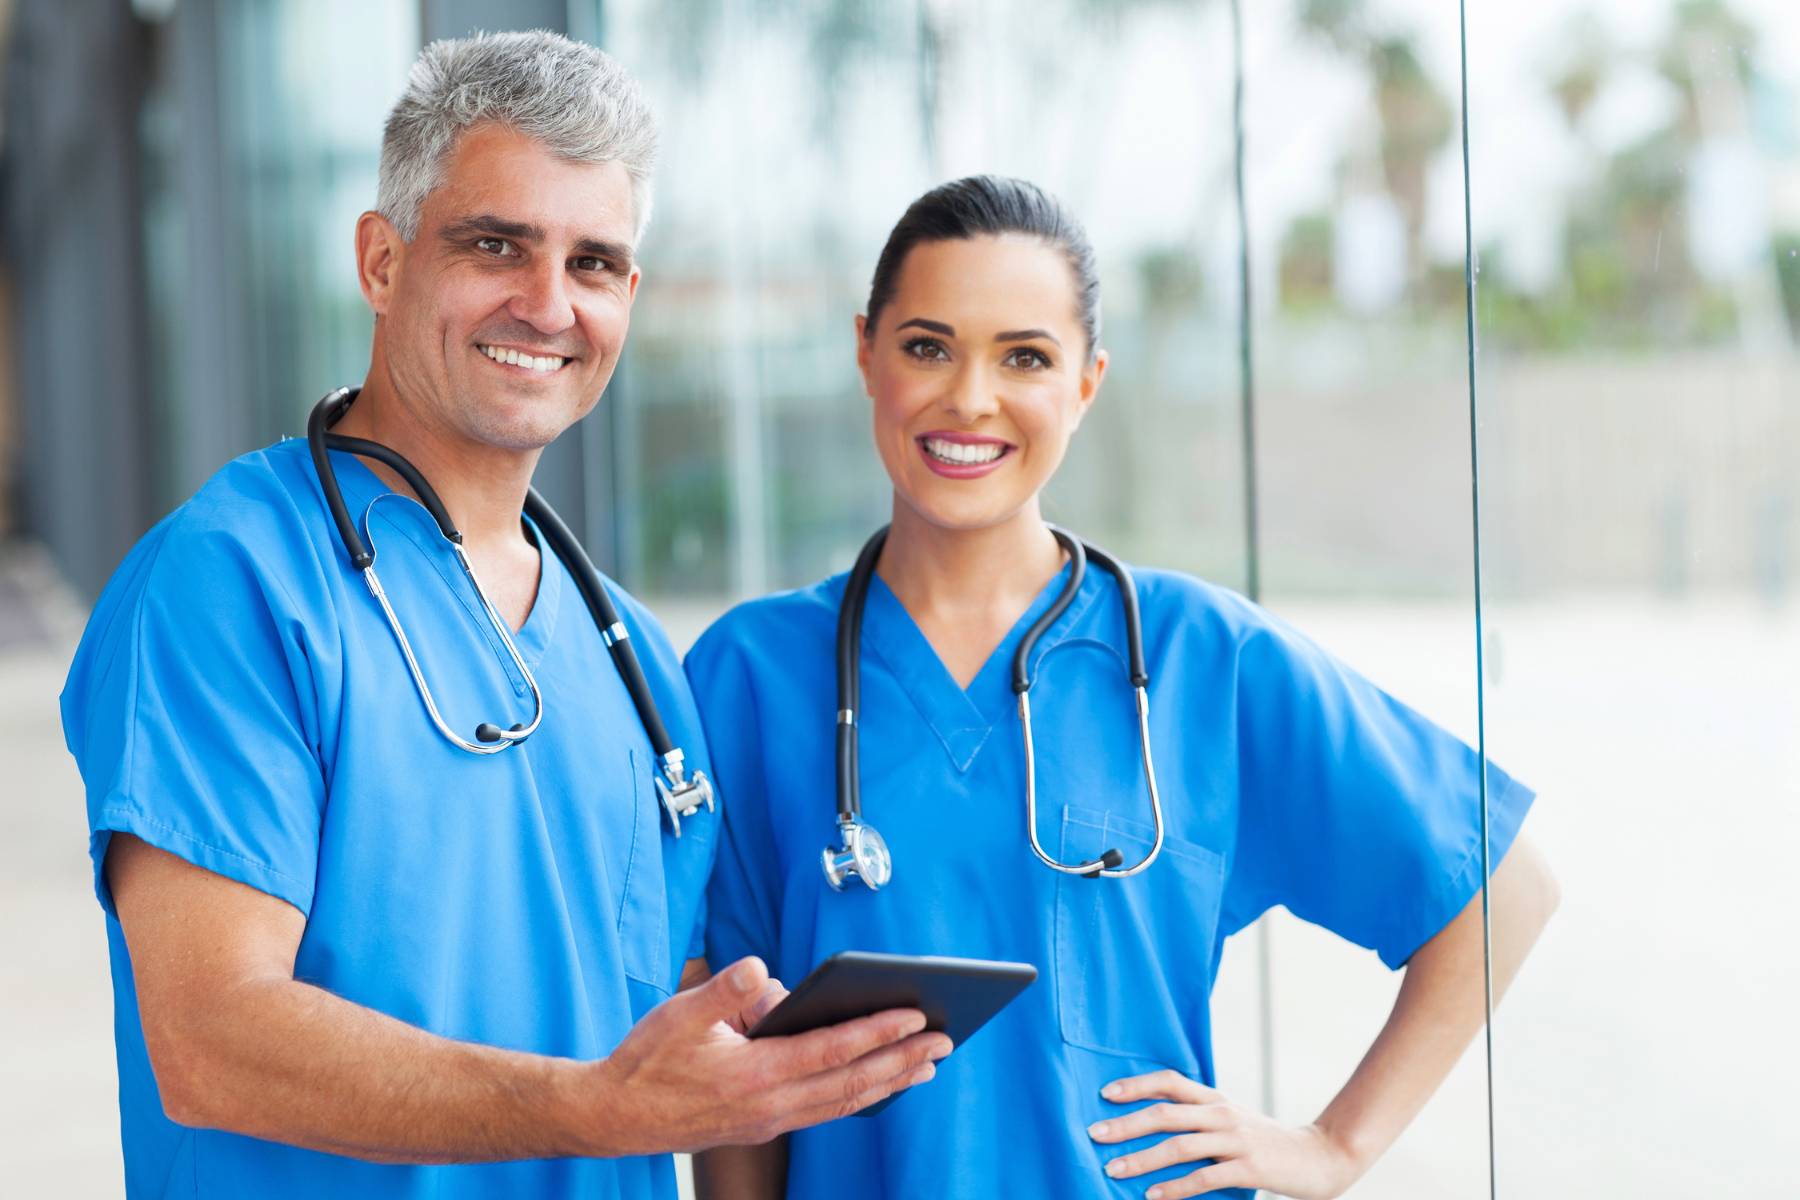 Two healthcare professionals discuss the difference between a nurse practitioner vs. RN.